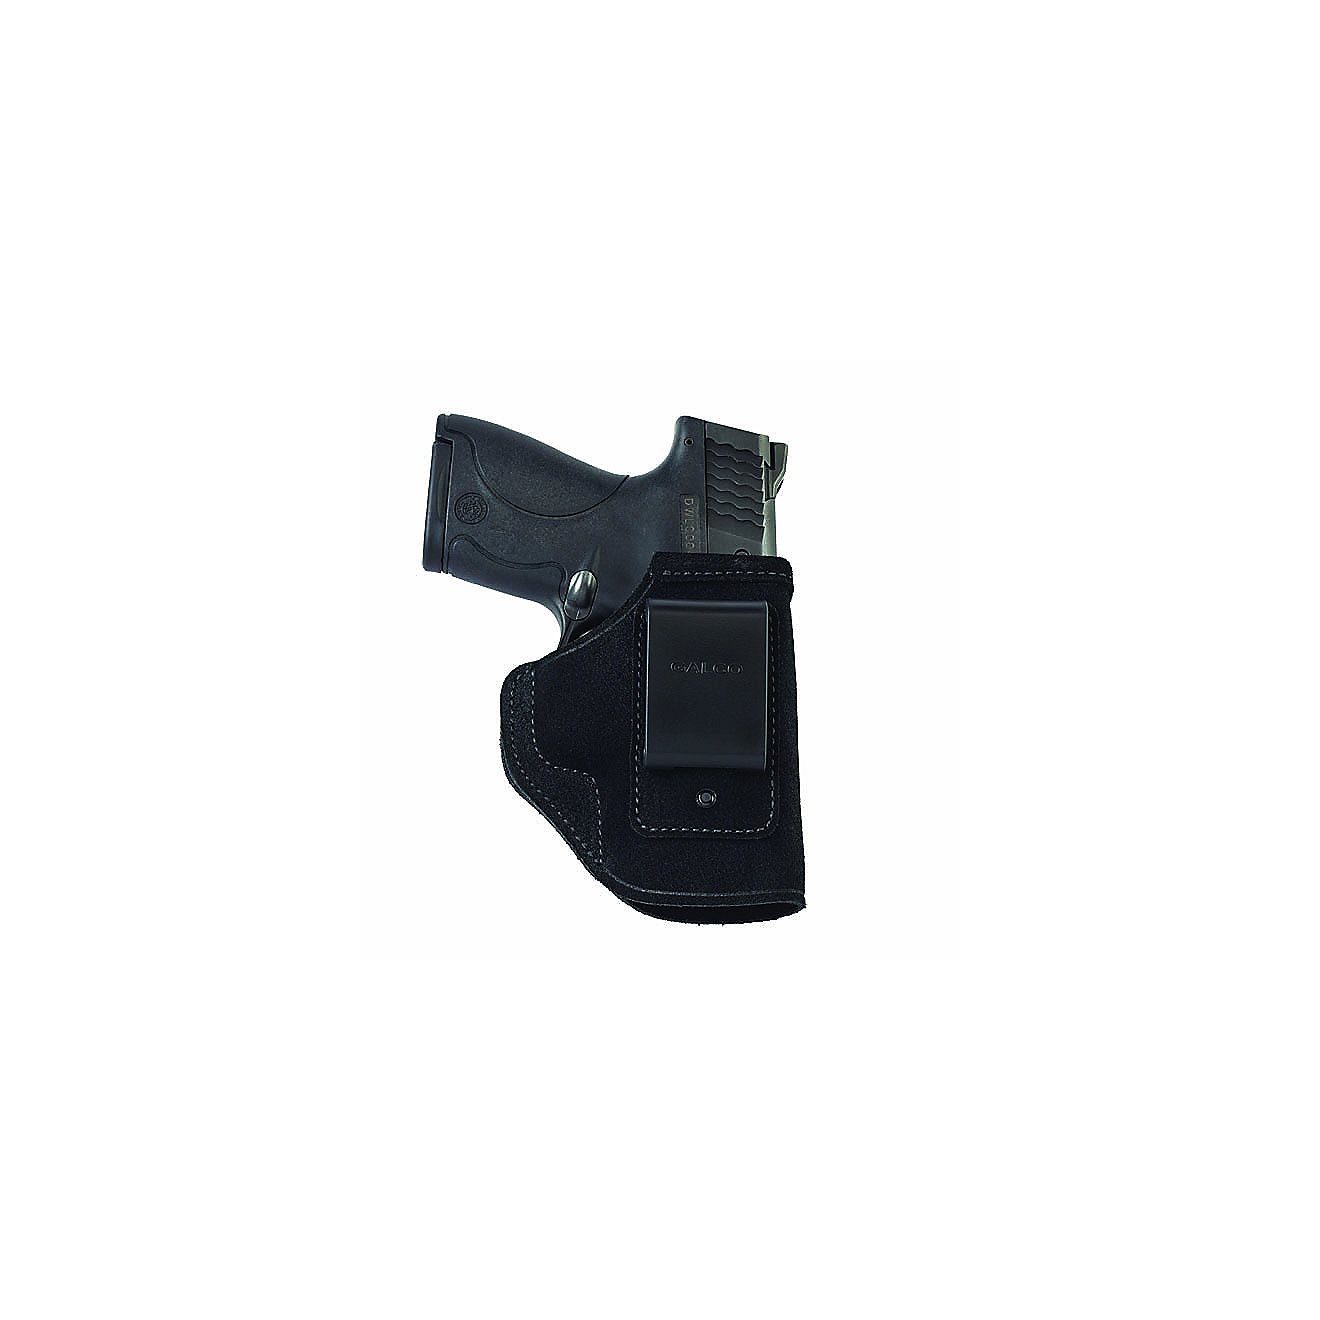 Galco Waistband Inside The Pant Holster for Glock 19 23 32 Natural